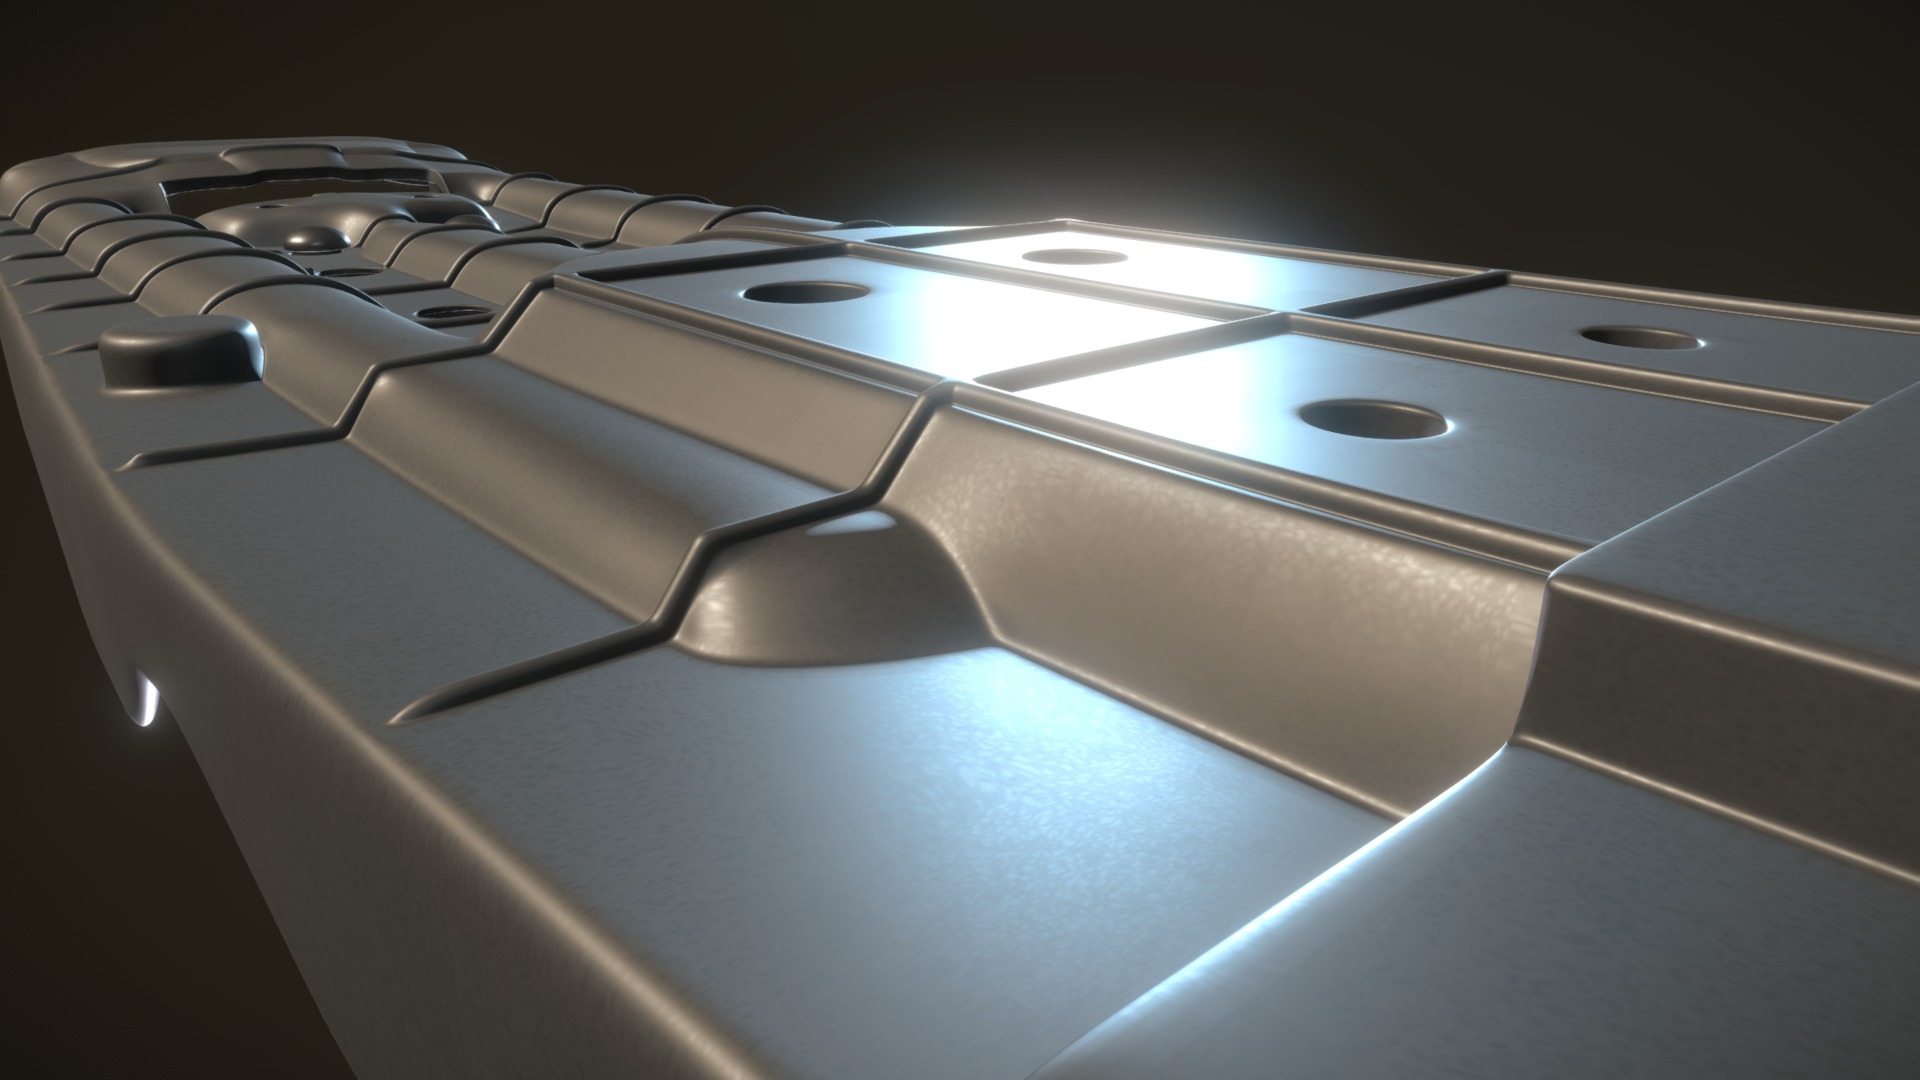 3D model 67 - This is a 3D model of the 67. The 3D model is about a close up of a keyboard.